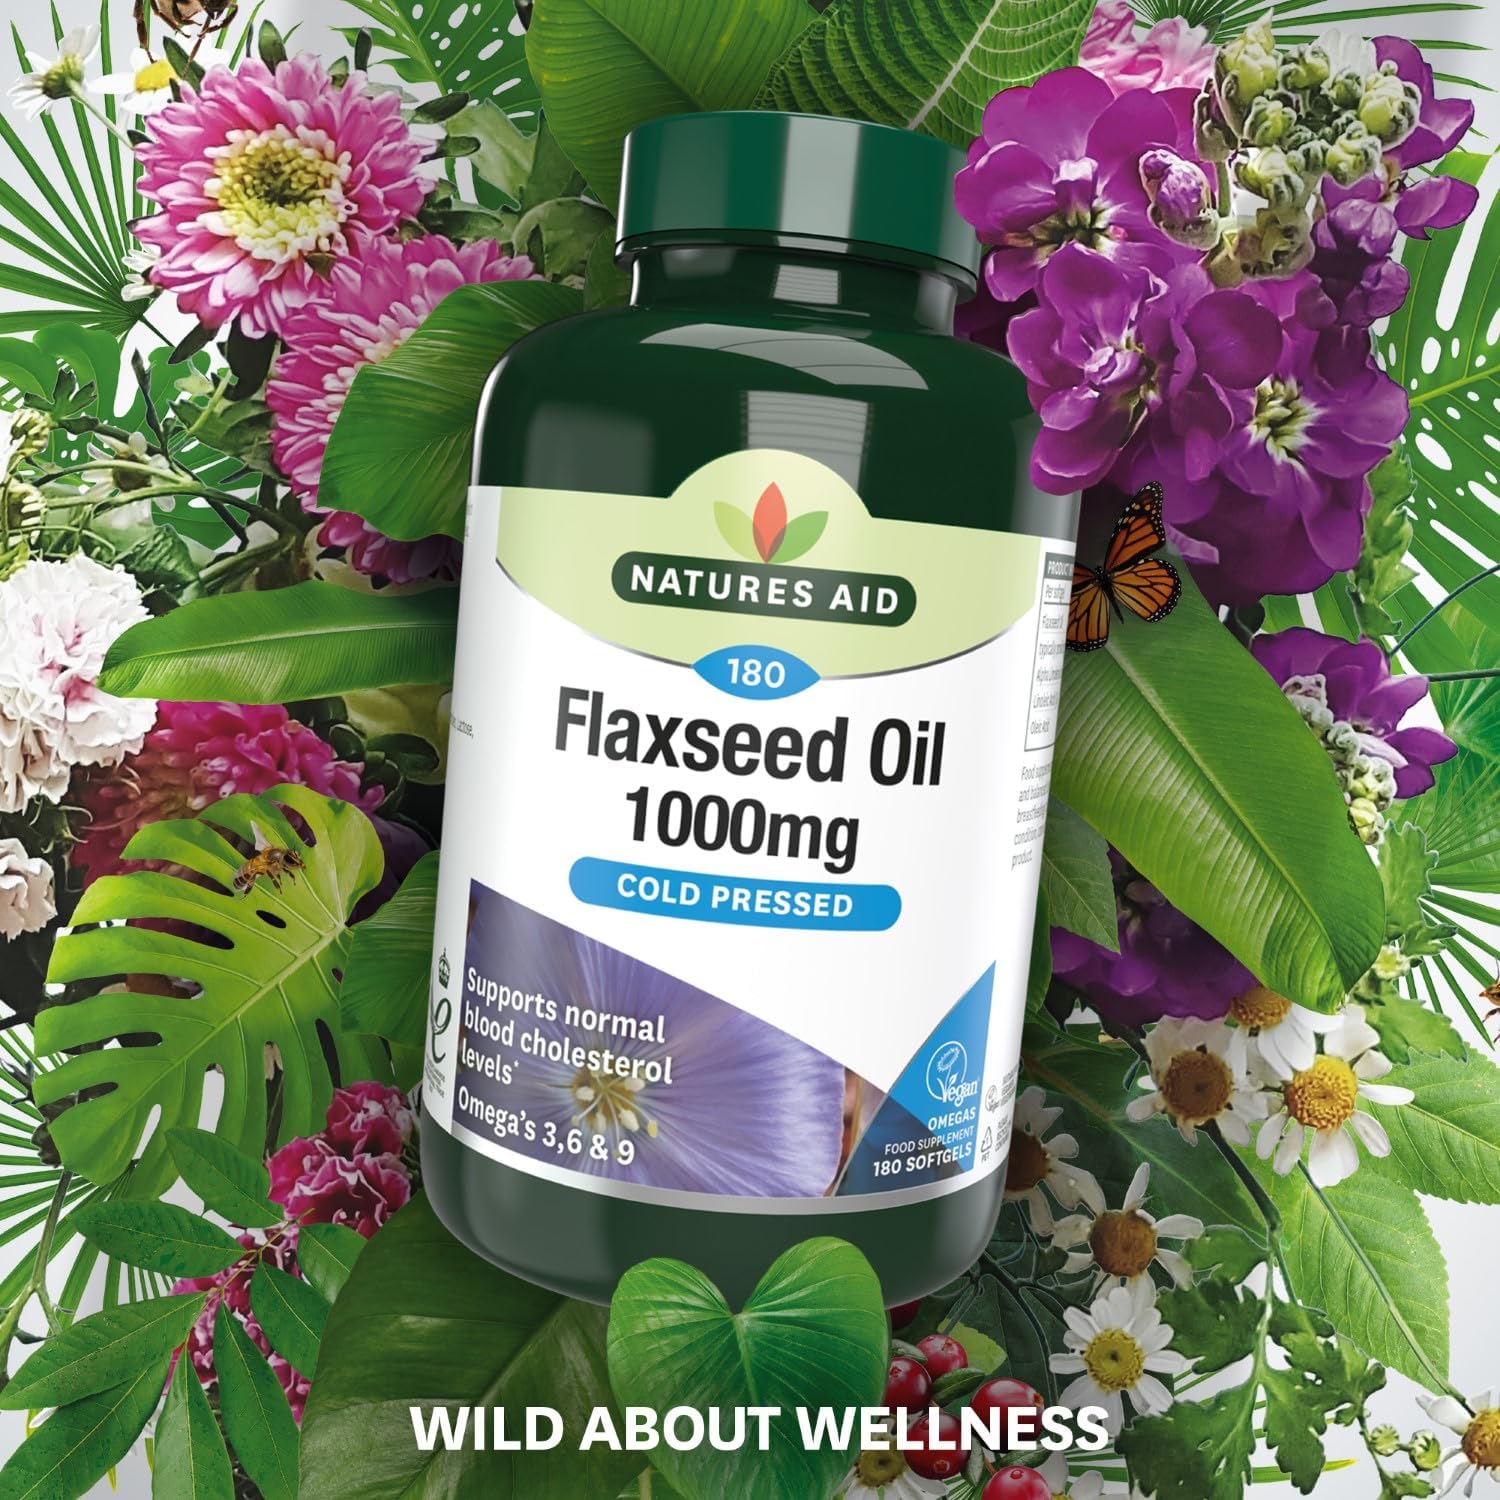 Flaxseed Oil Cold-Pressed Omega 3, 6 & 9 135 Softgels